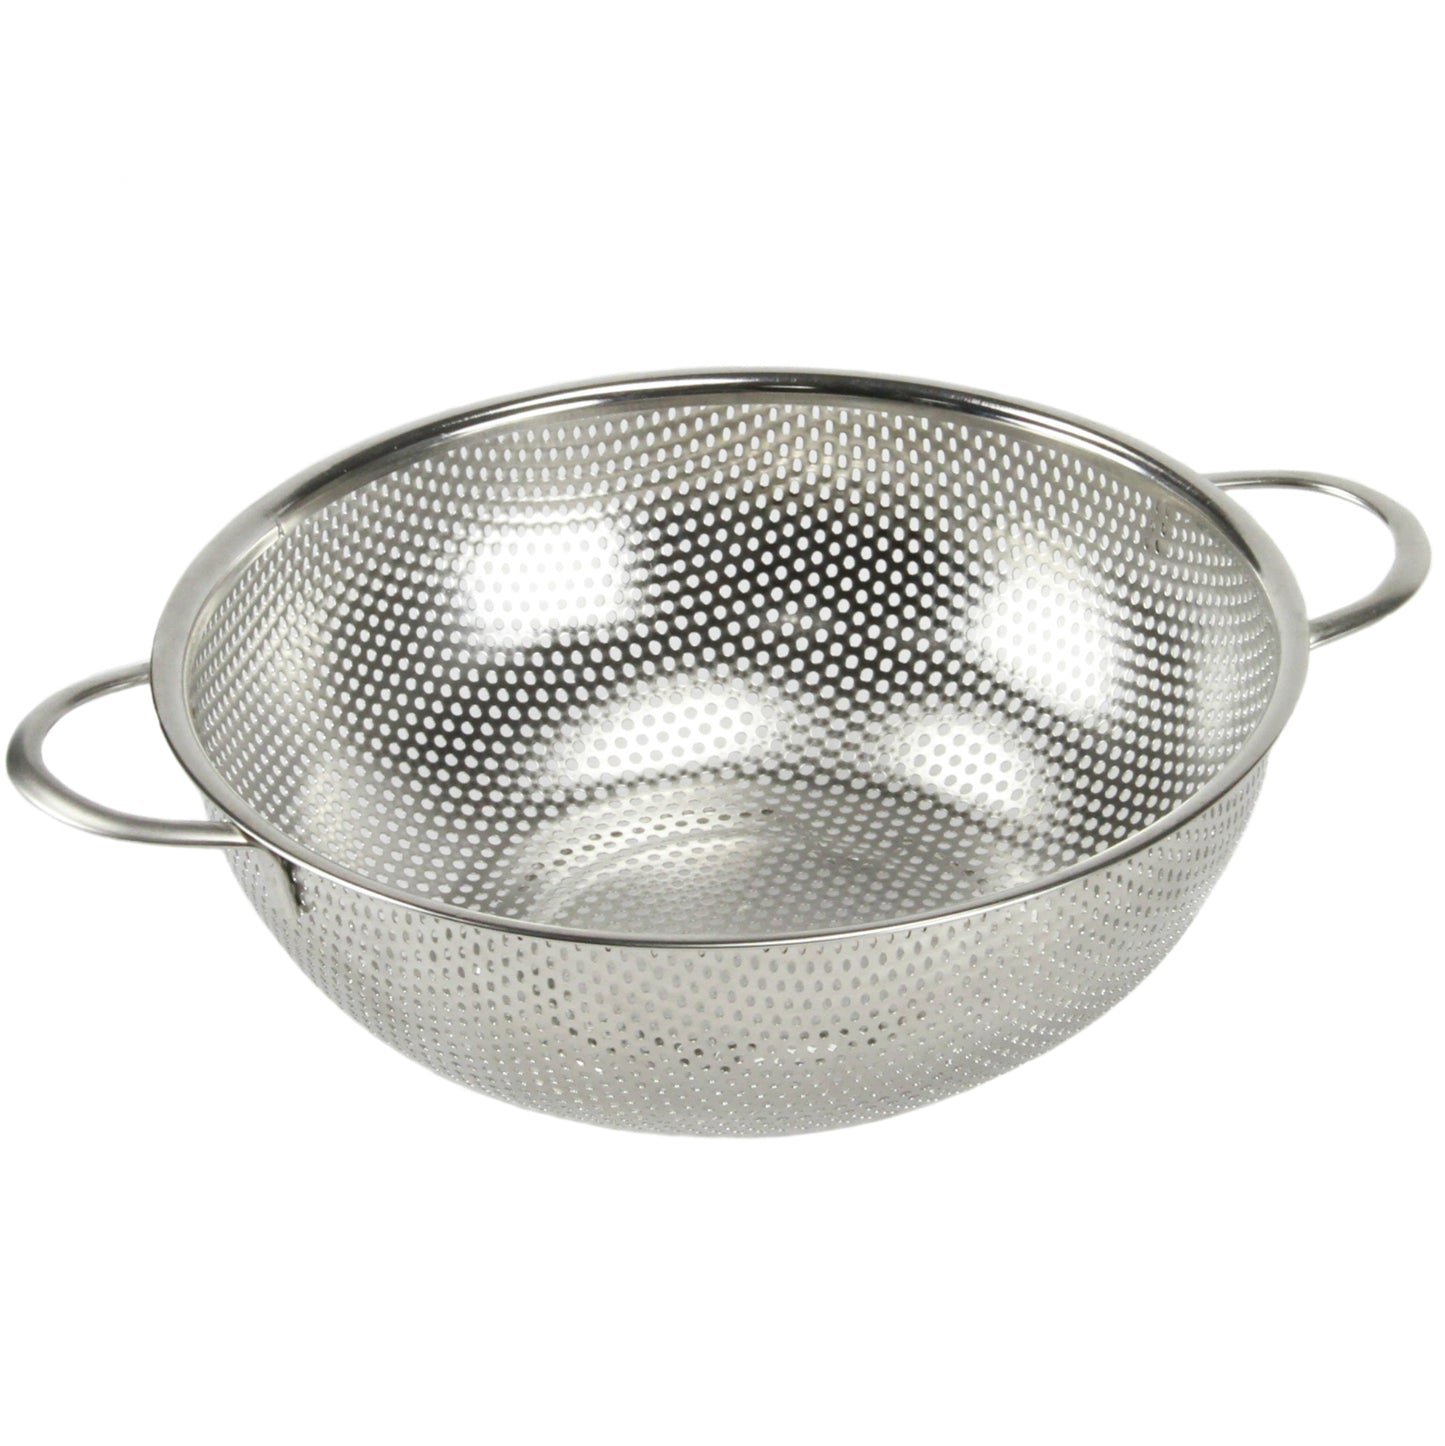 25CM Vegetable Strainer Bowl Stainless Steel with Handles